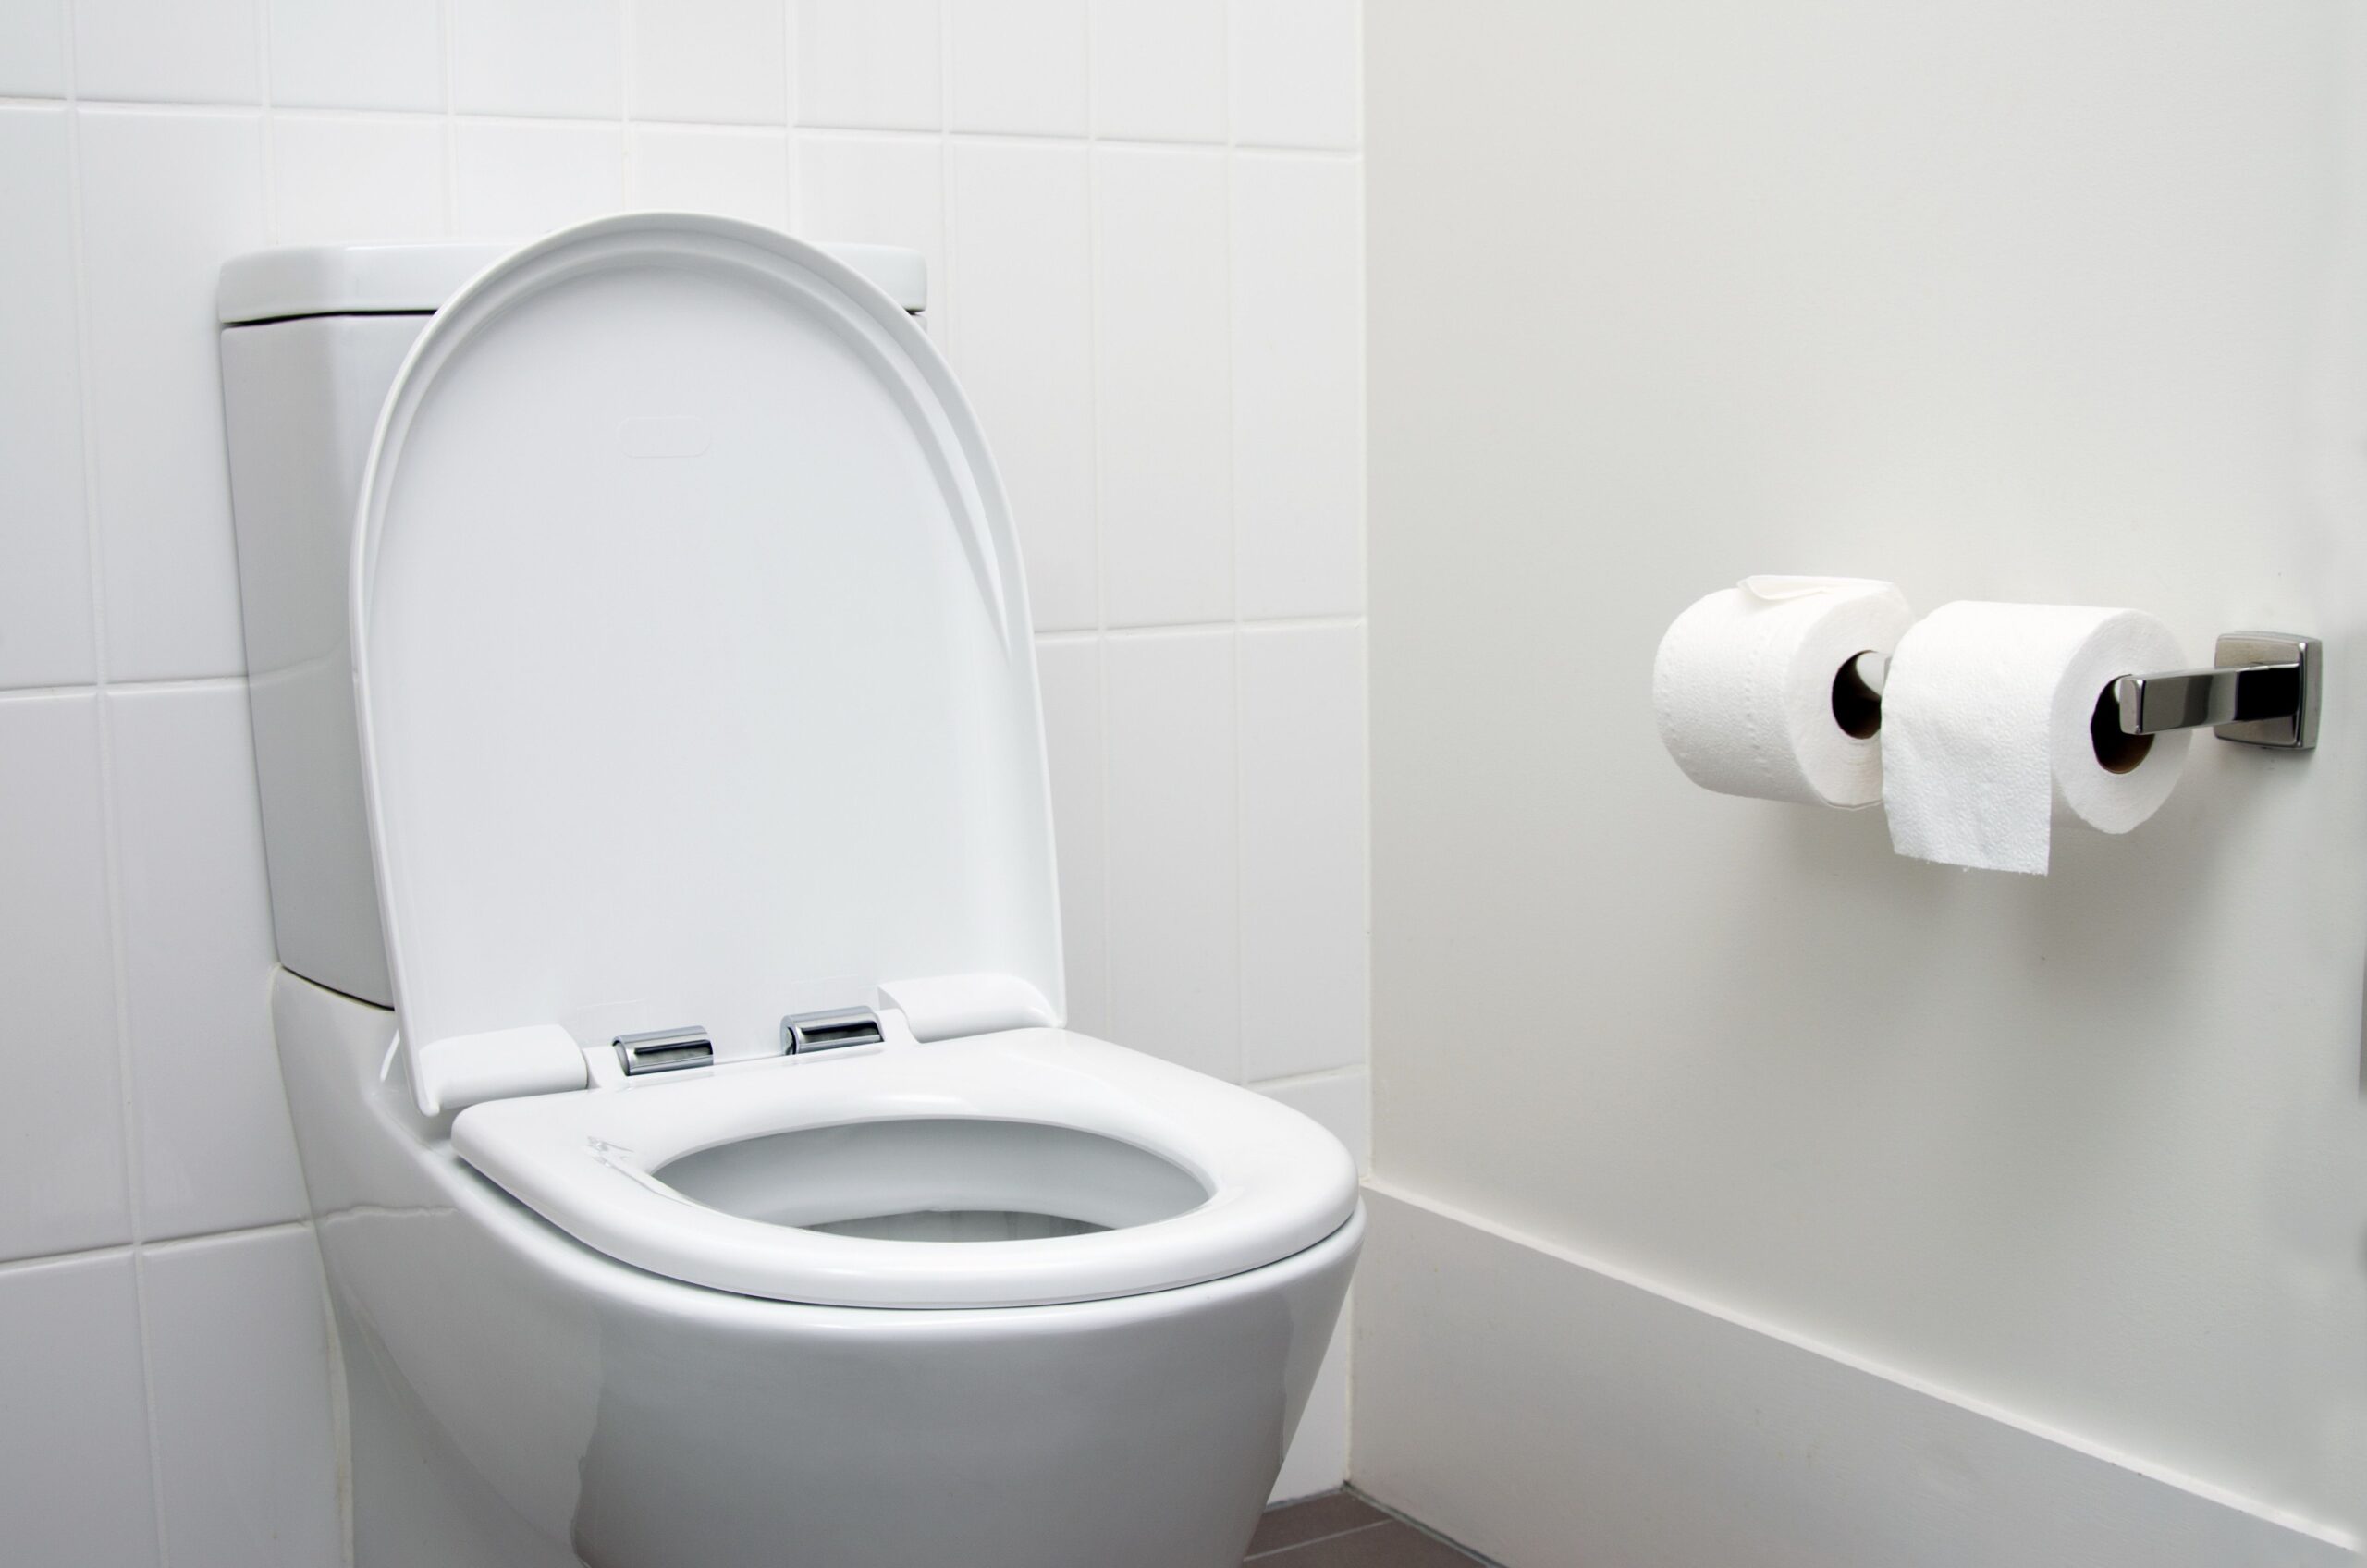 Picture of a toilet representing bitcoin dump